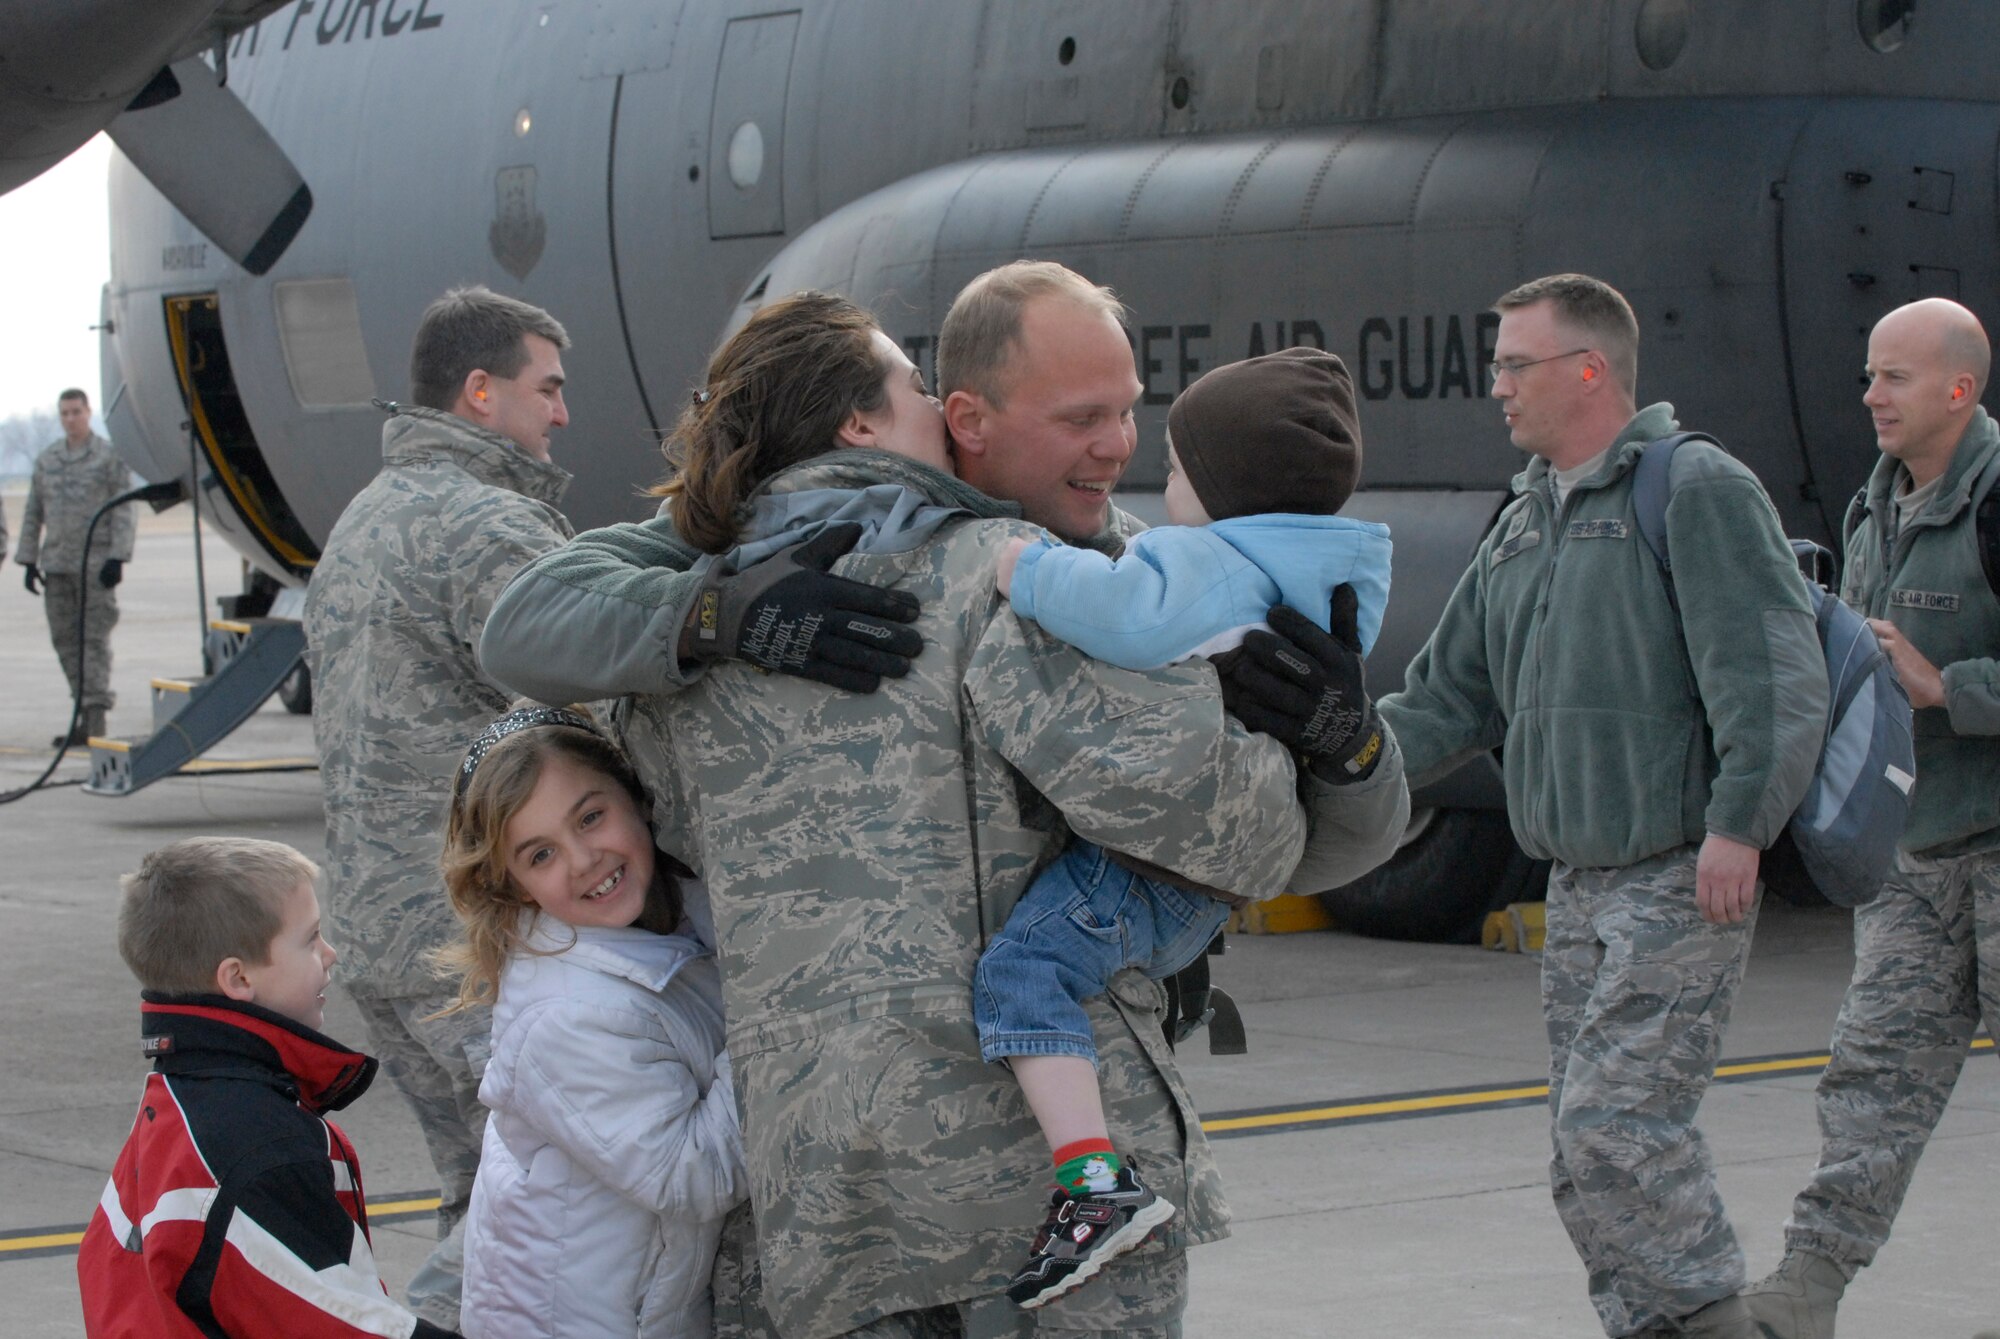 Joyful families embrace at the air guard base at the Minneapolis – St. Paul international airport on Dec. 21, 2011, as forty airmen disembark from an aircraft, returning from six months in Kuwait supporting Operation New Dawn. The airmen are from the 133rd Civil Engineer Squadron of the Minnesota Air National Guard and have been working with buildings and utilities at bases in Kuwait as the U. S. military pulled out of Iraq. Minnesota National Guard photo by Sgt. Johnny Angelo